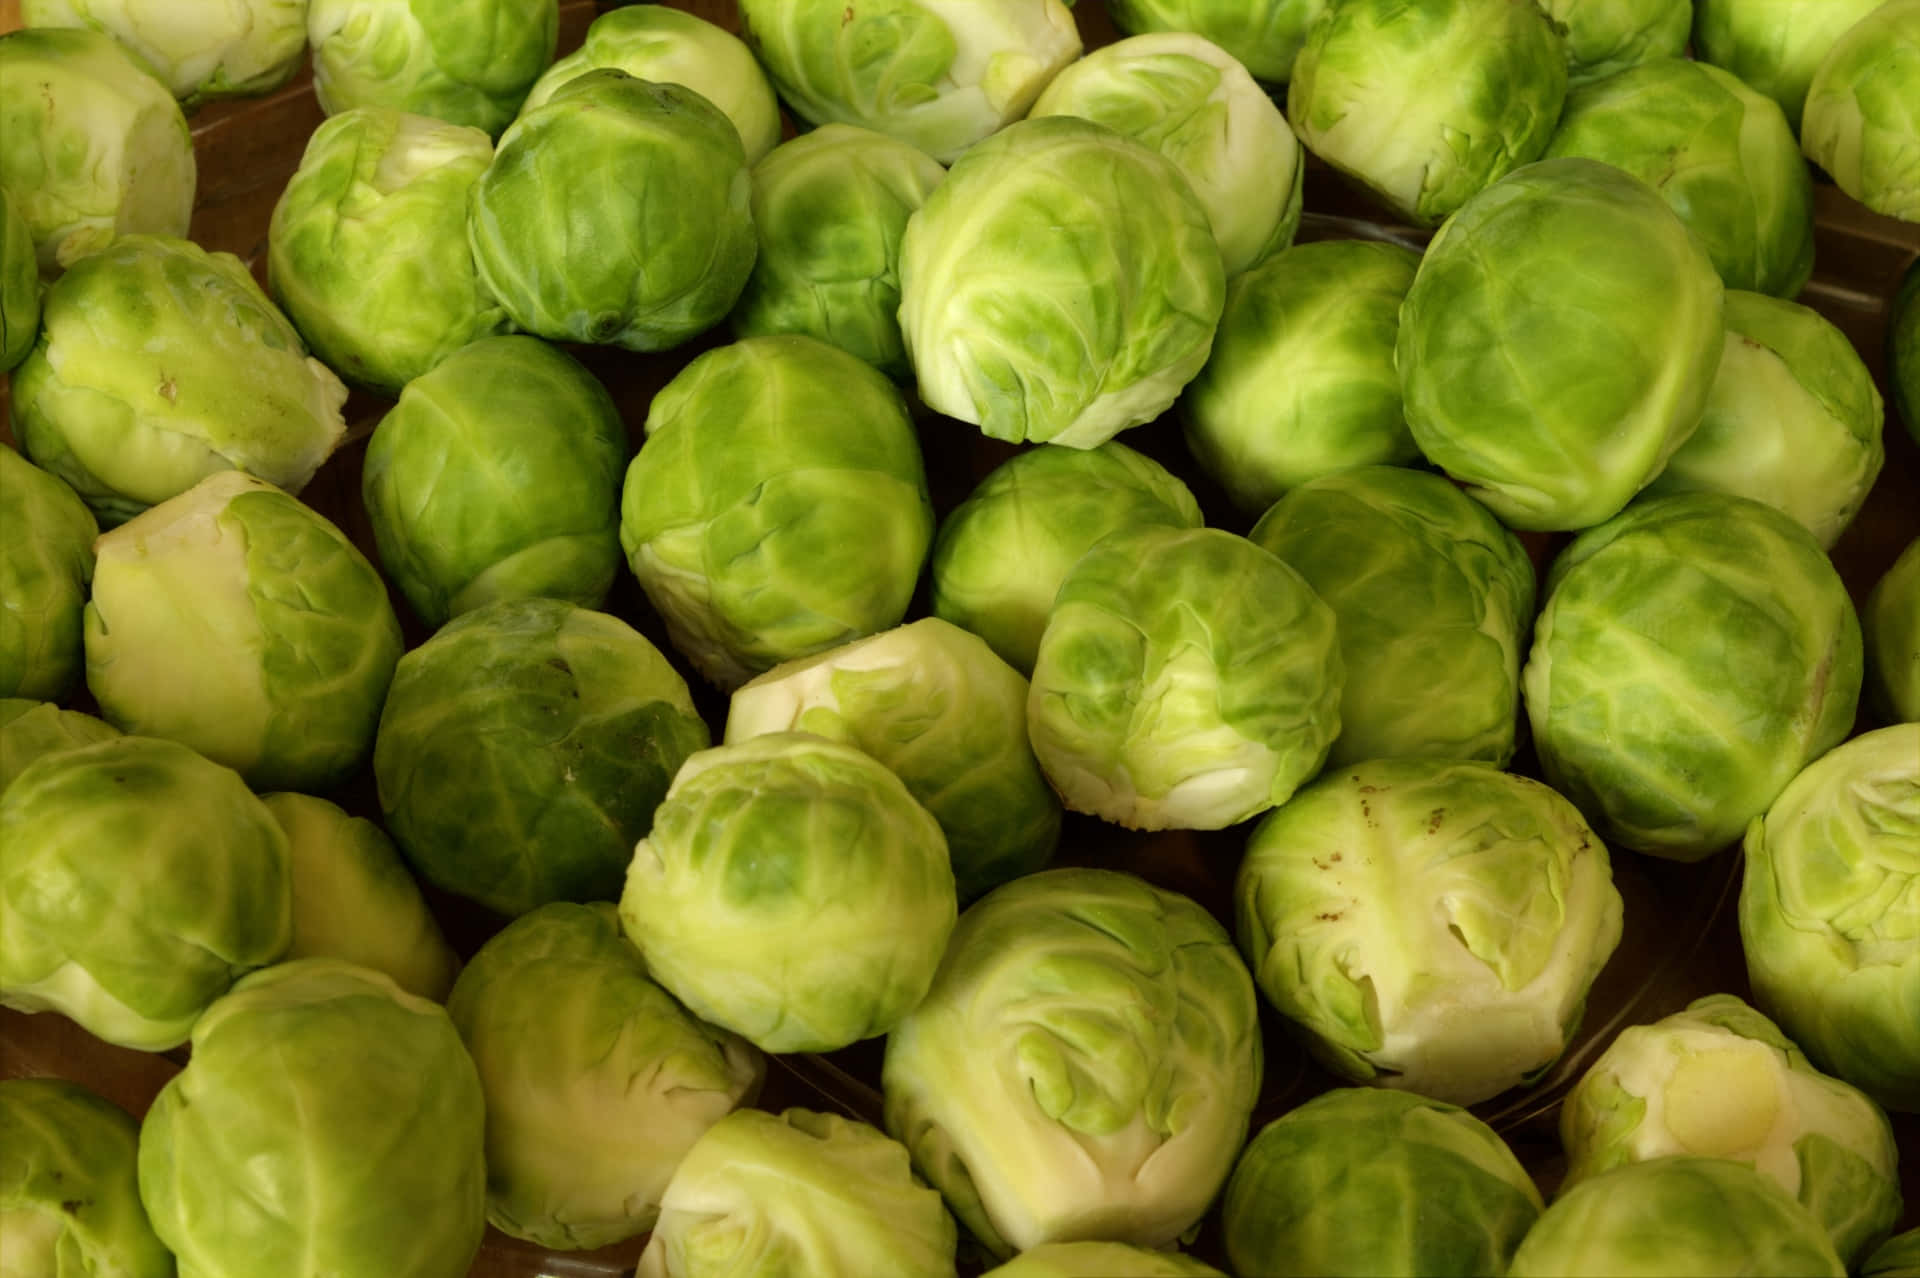 "A delicious bowl of Brussels Sprouts ready to be enjoyed."